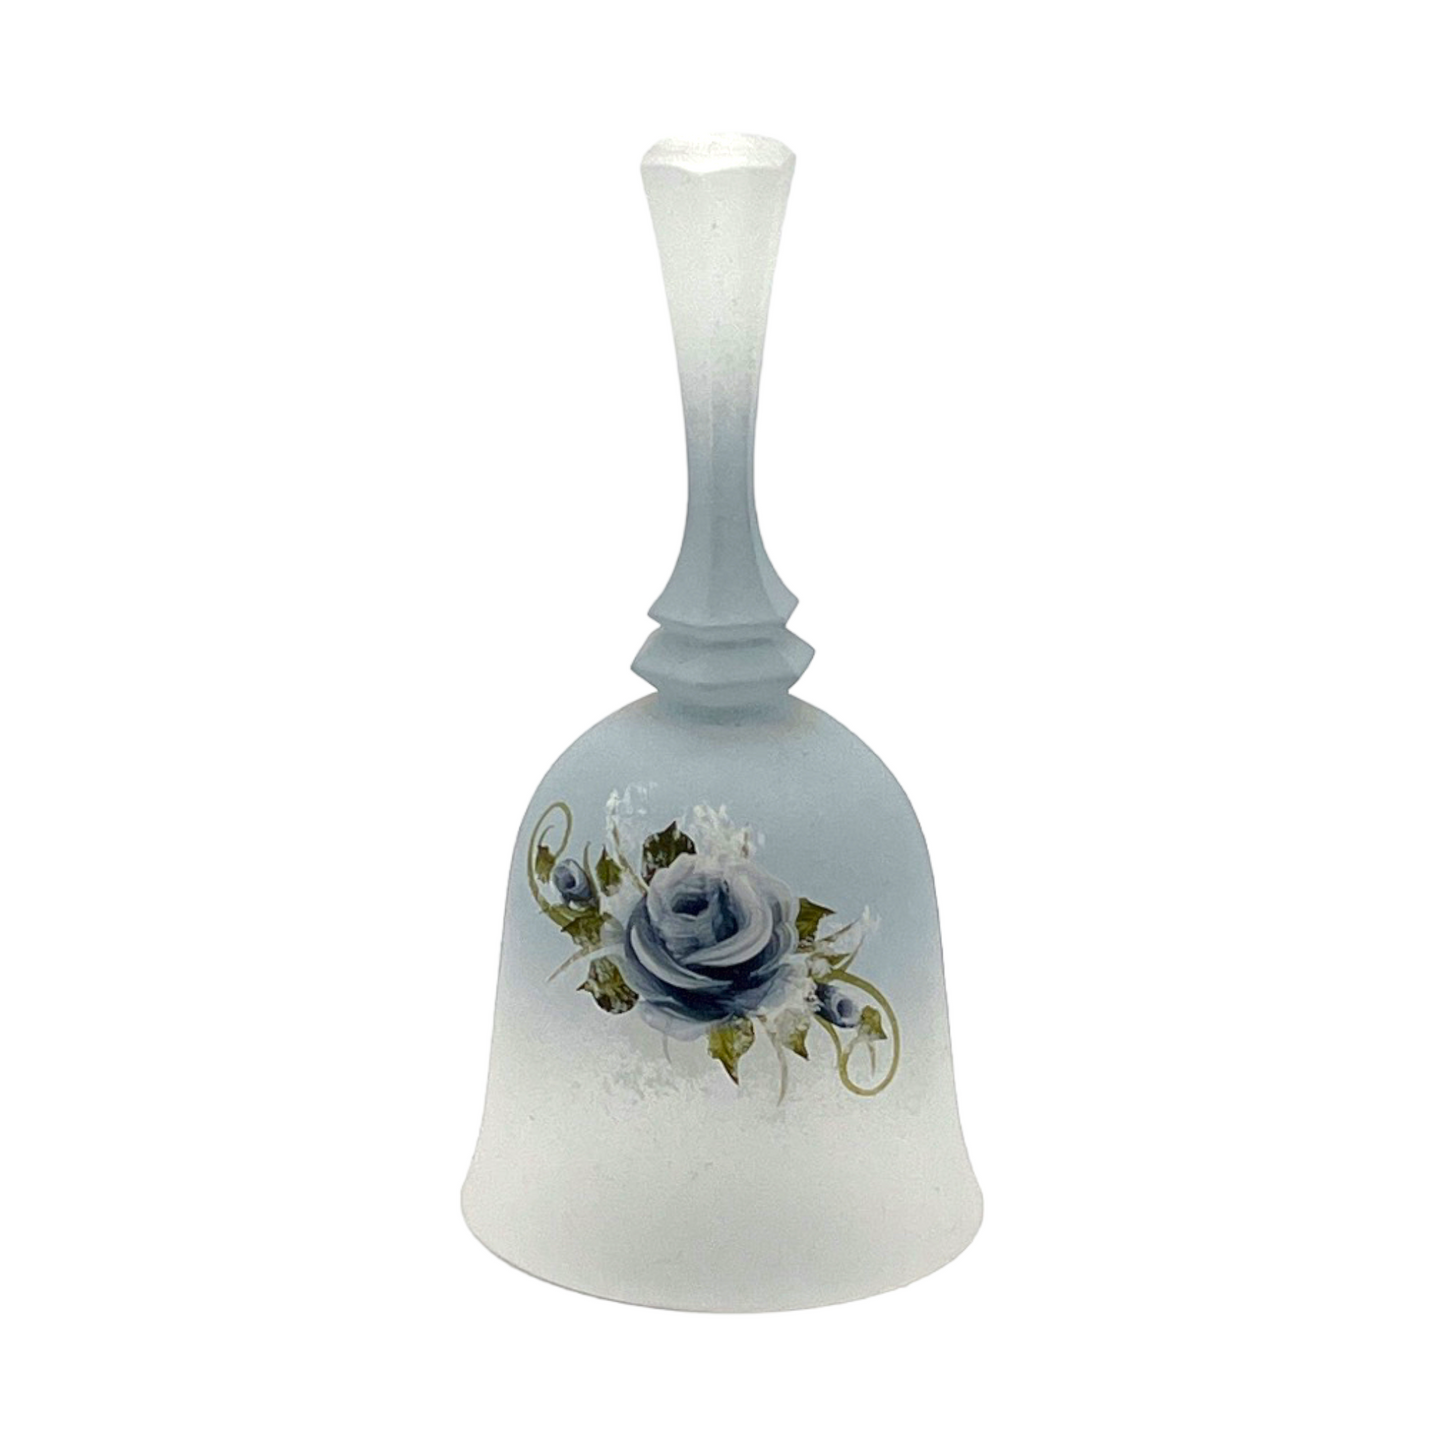 Bell - Hand Painted Rose - Signed - 1987 - 4.5"